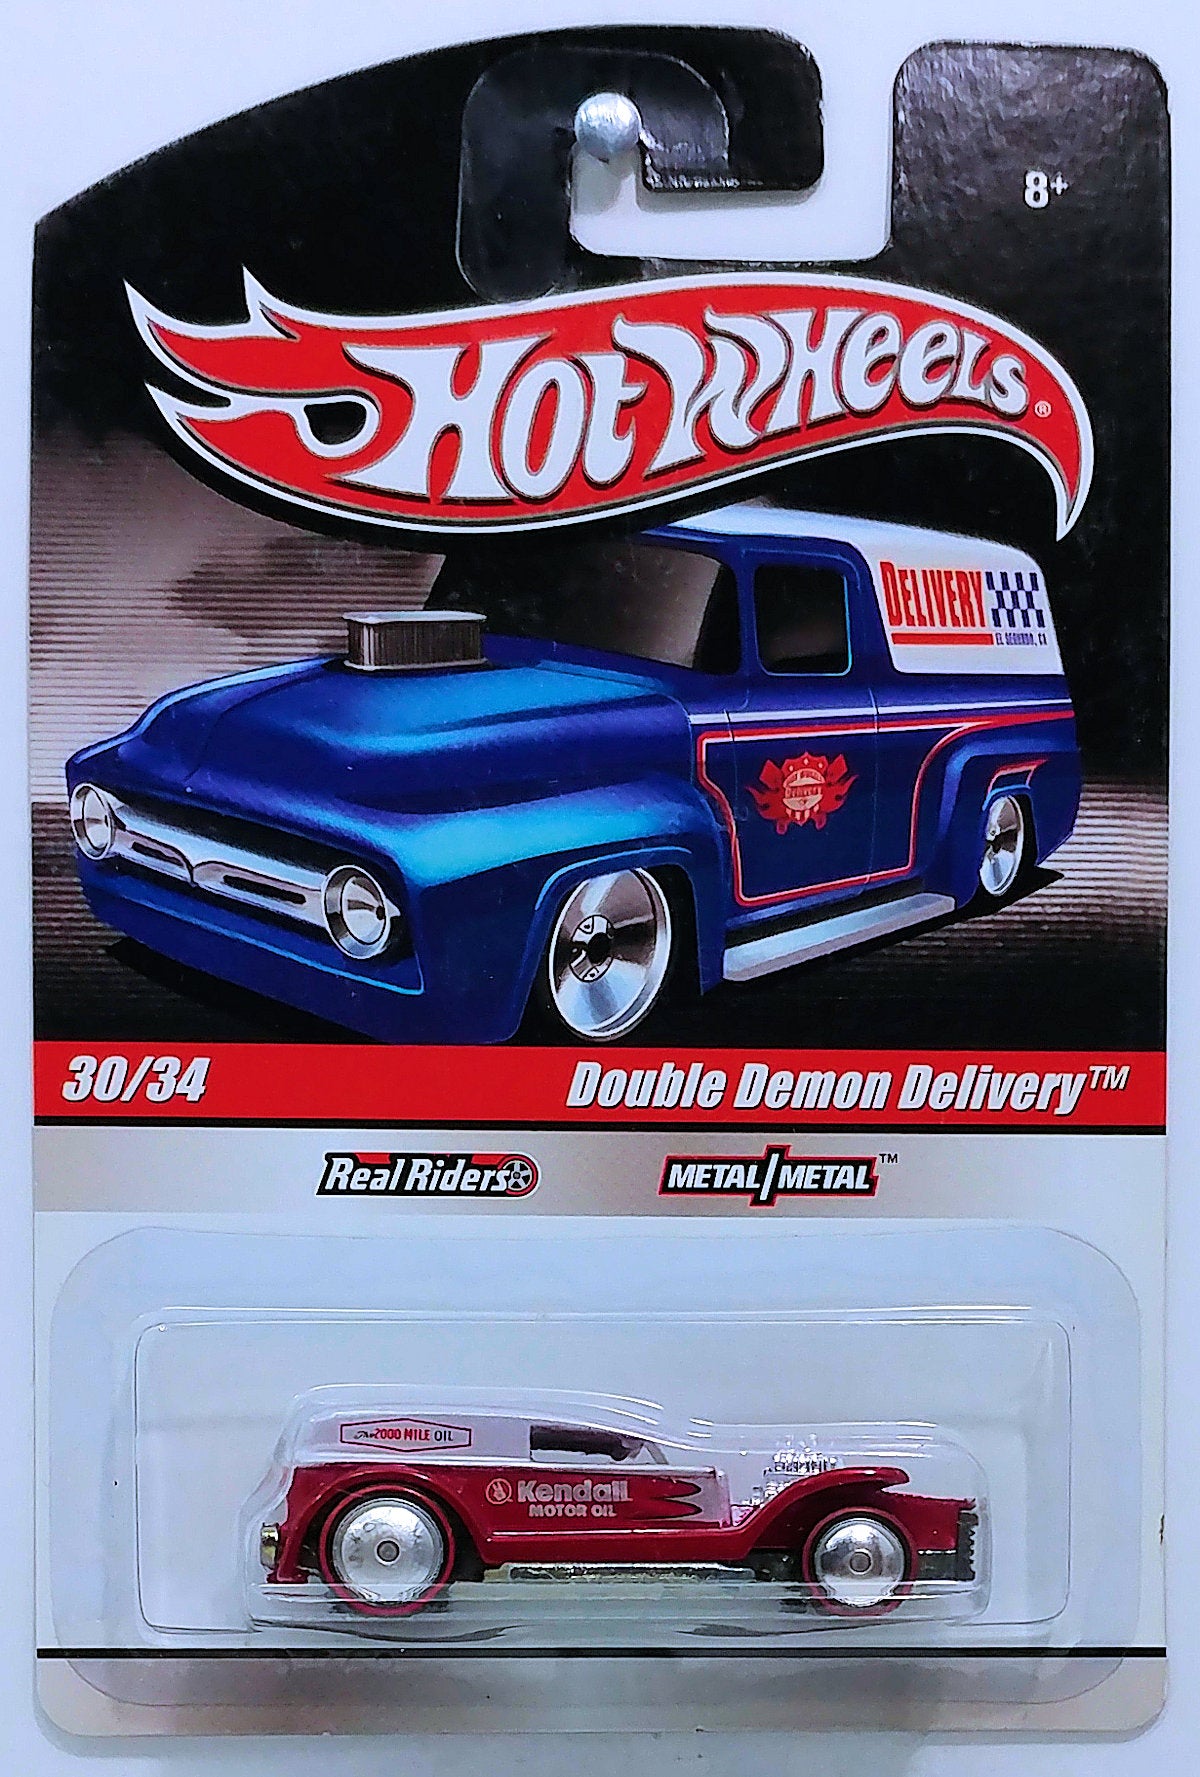 Hot Wheels 2010 - Delivery / Slick Rides 30/34 - Double Demon Delivery - Metallic Silver & Red / Kendall Motor Oil - Metal/Metal & Real Riders